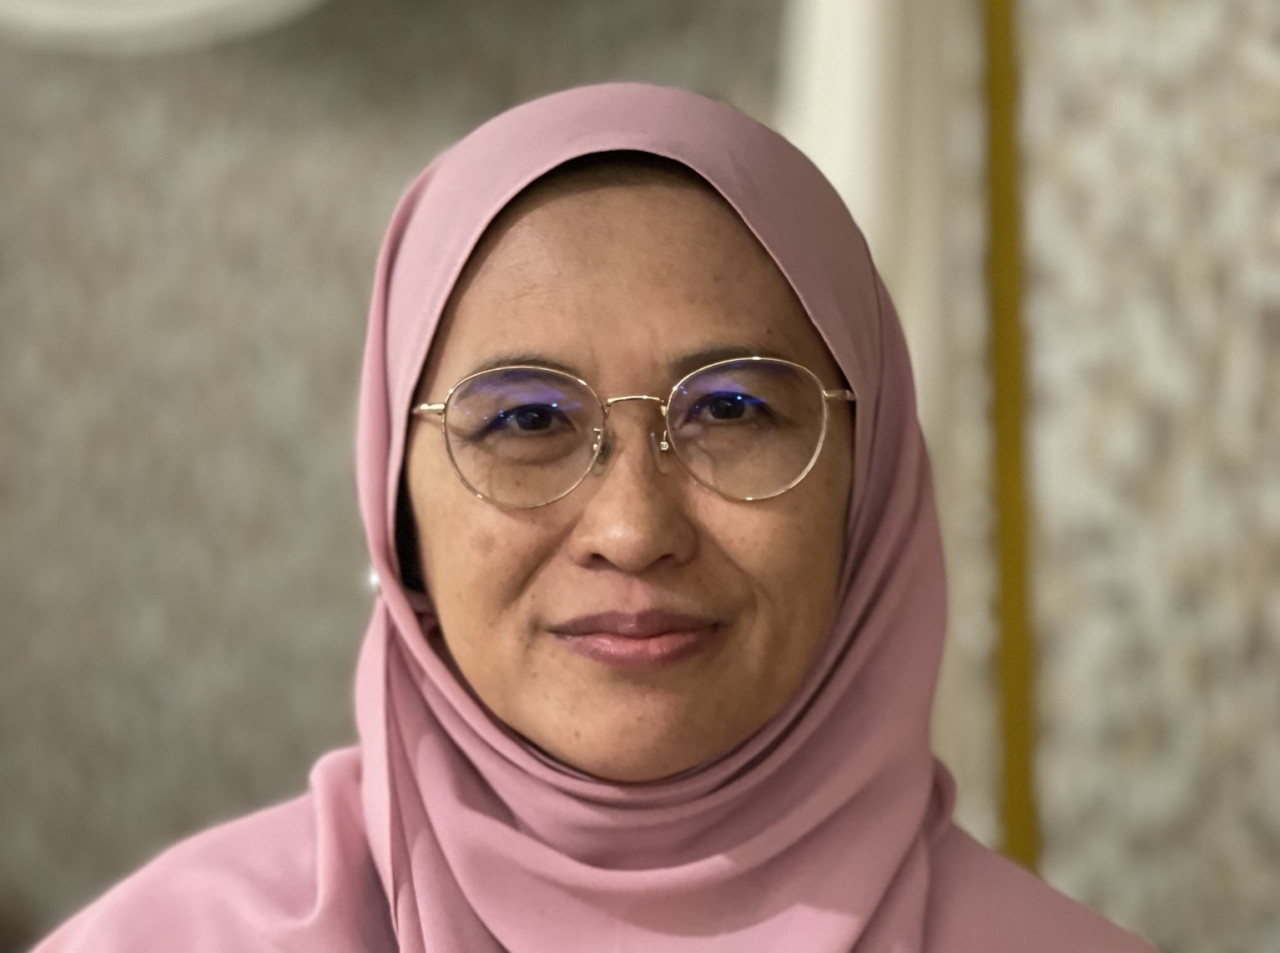 Universiti Teknologi Mara senior lecturer Julenah Ag Nuddin says her research team has successfully reduced heavy metal content in the soil from the former mine and grown a plant via the microbe-mediated phytoremediation approach in a pot trial. – JASON SANTOS/The Vibes pic, August 29, 2023 